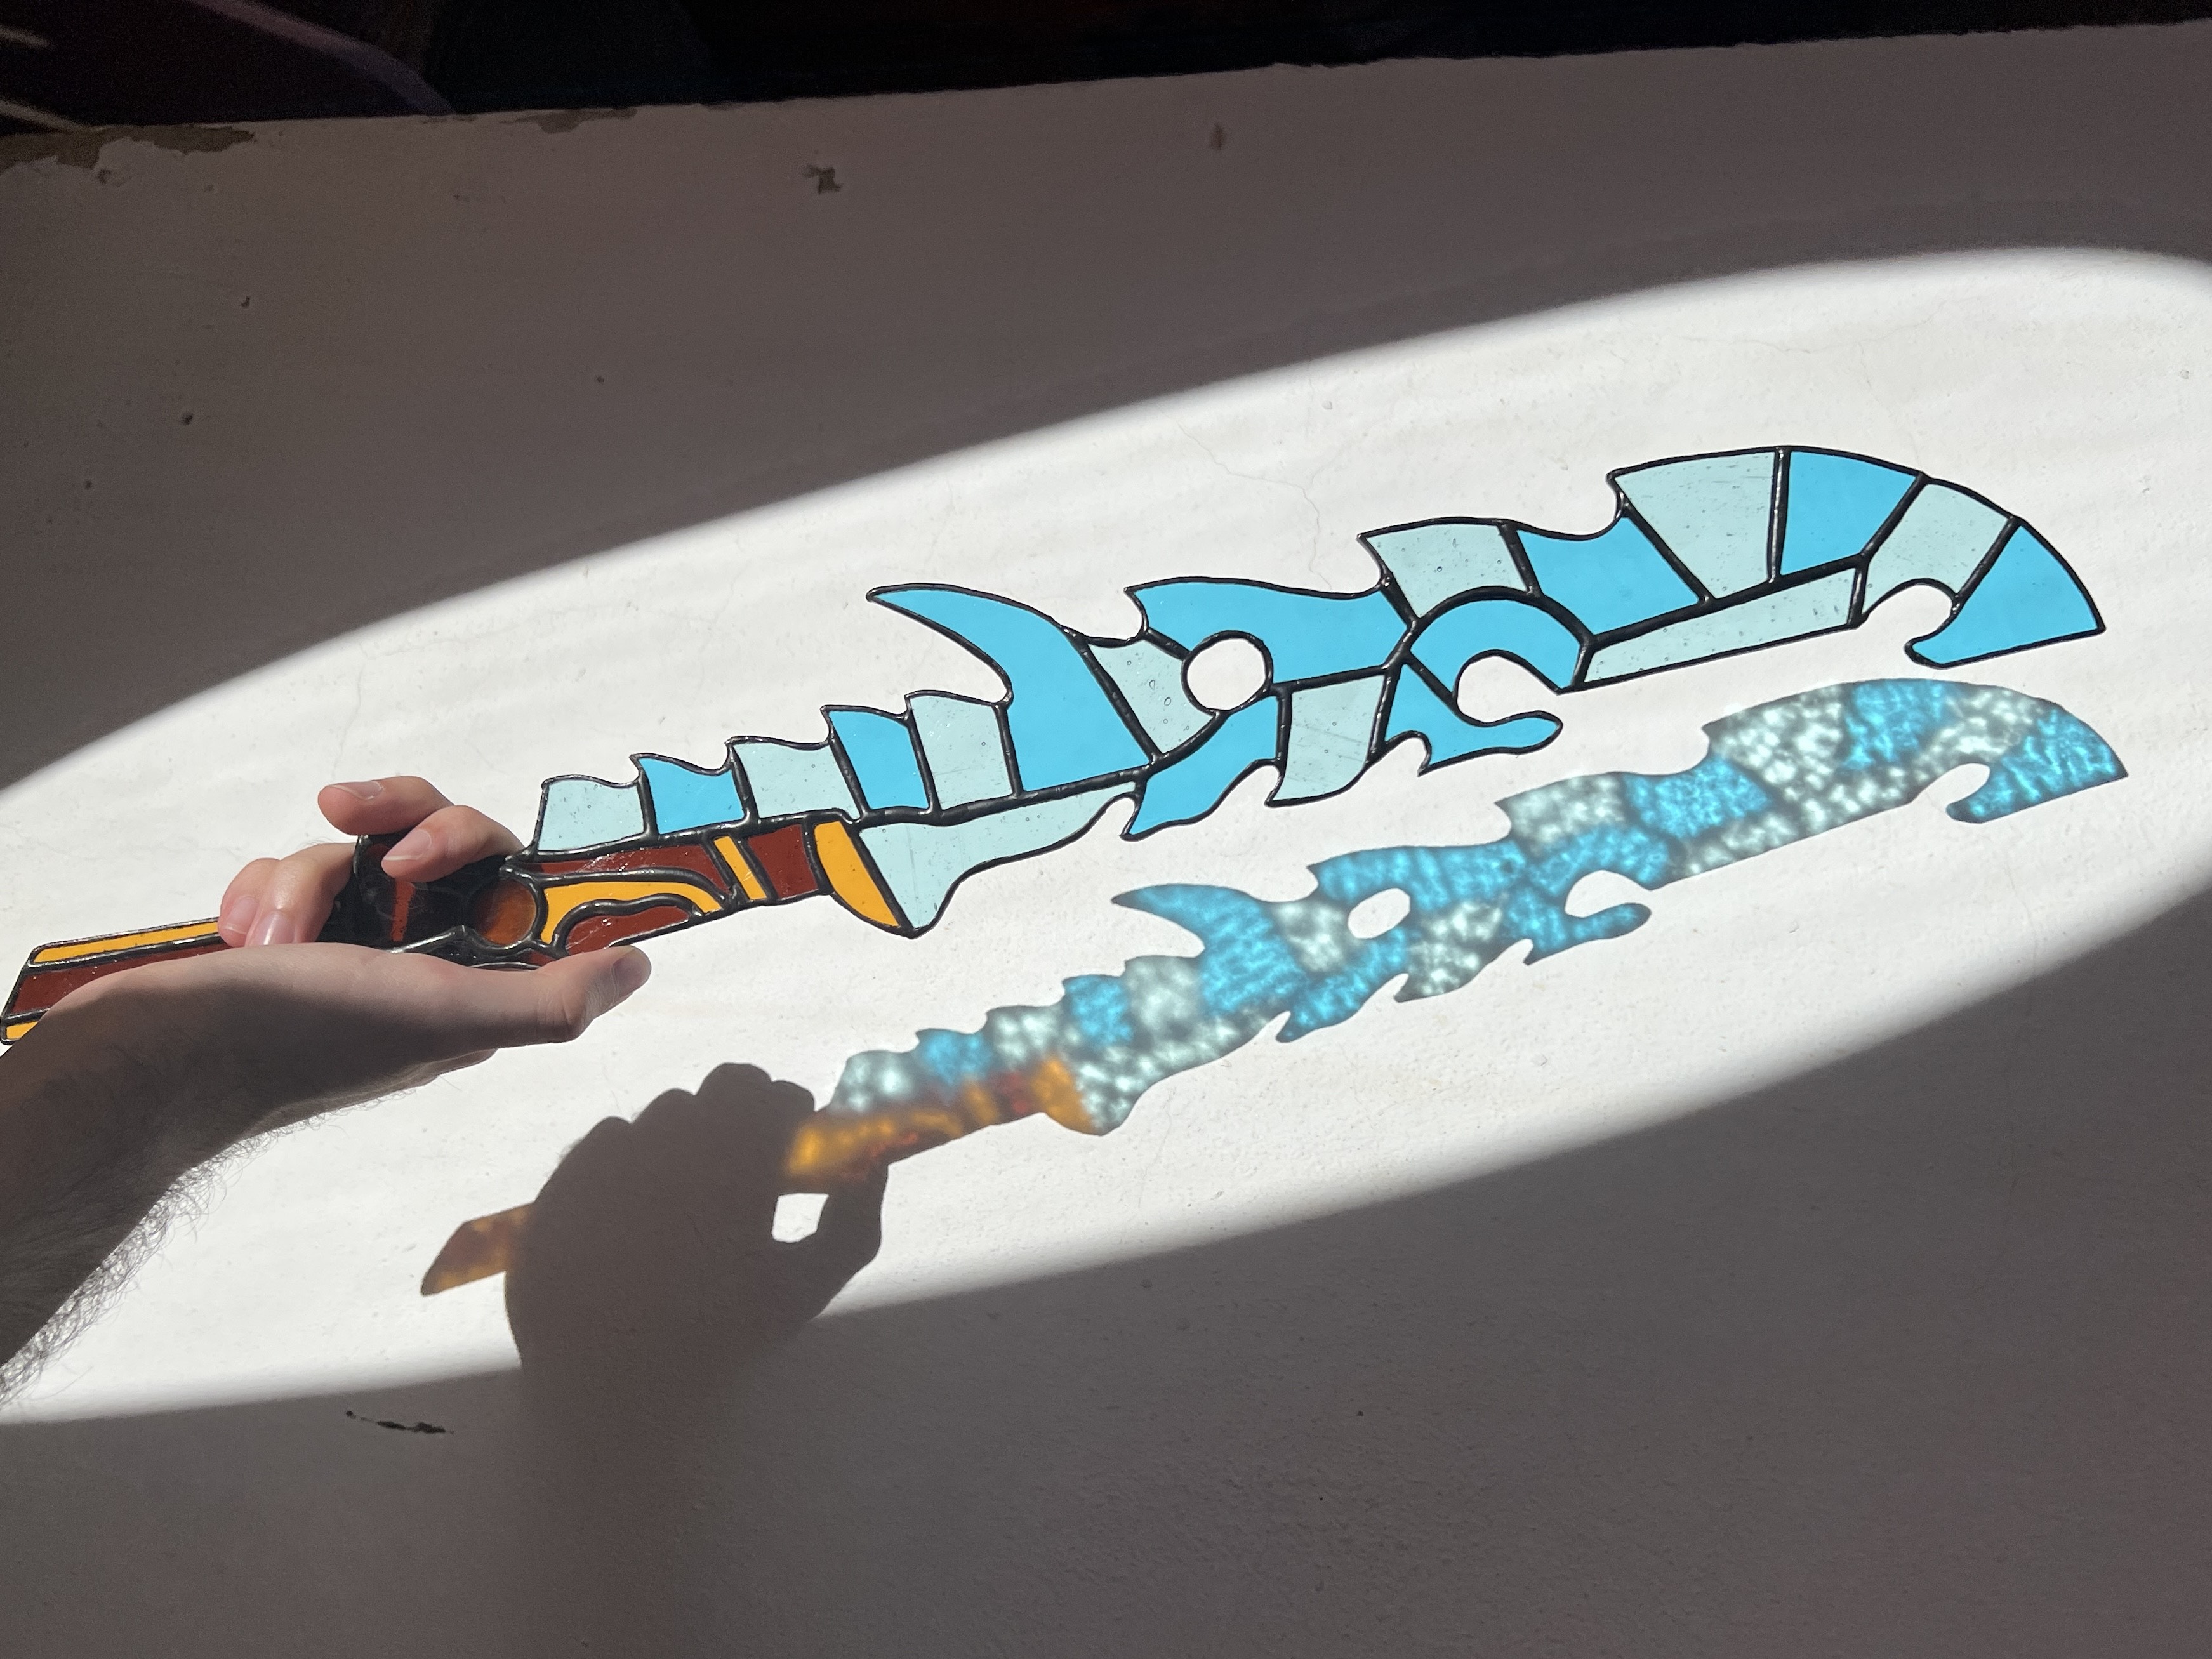 A Guardian Sword++ from Zelda: Breath of the Wild, but made out of stained glass. It’s being held in a spotlight over a white surface, so its colorful shadow can be seen below it.